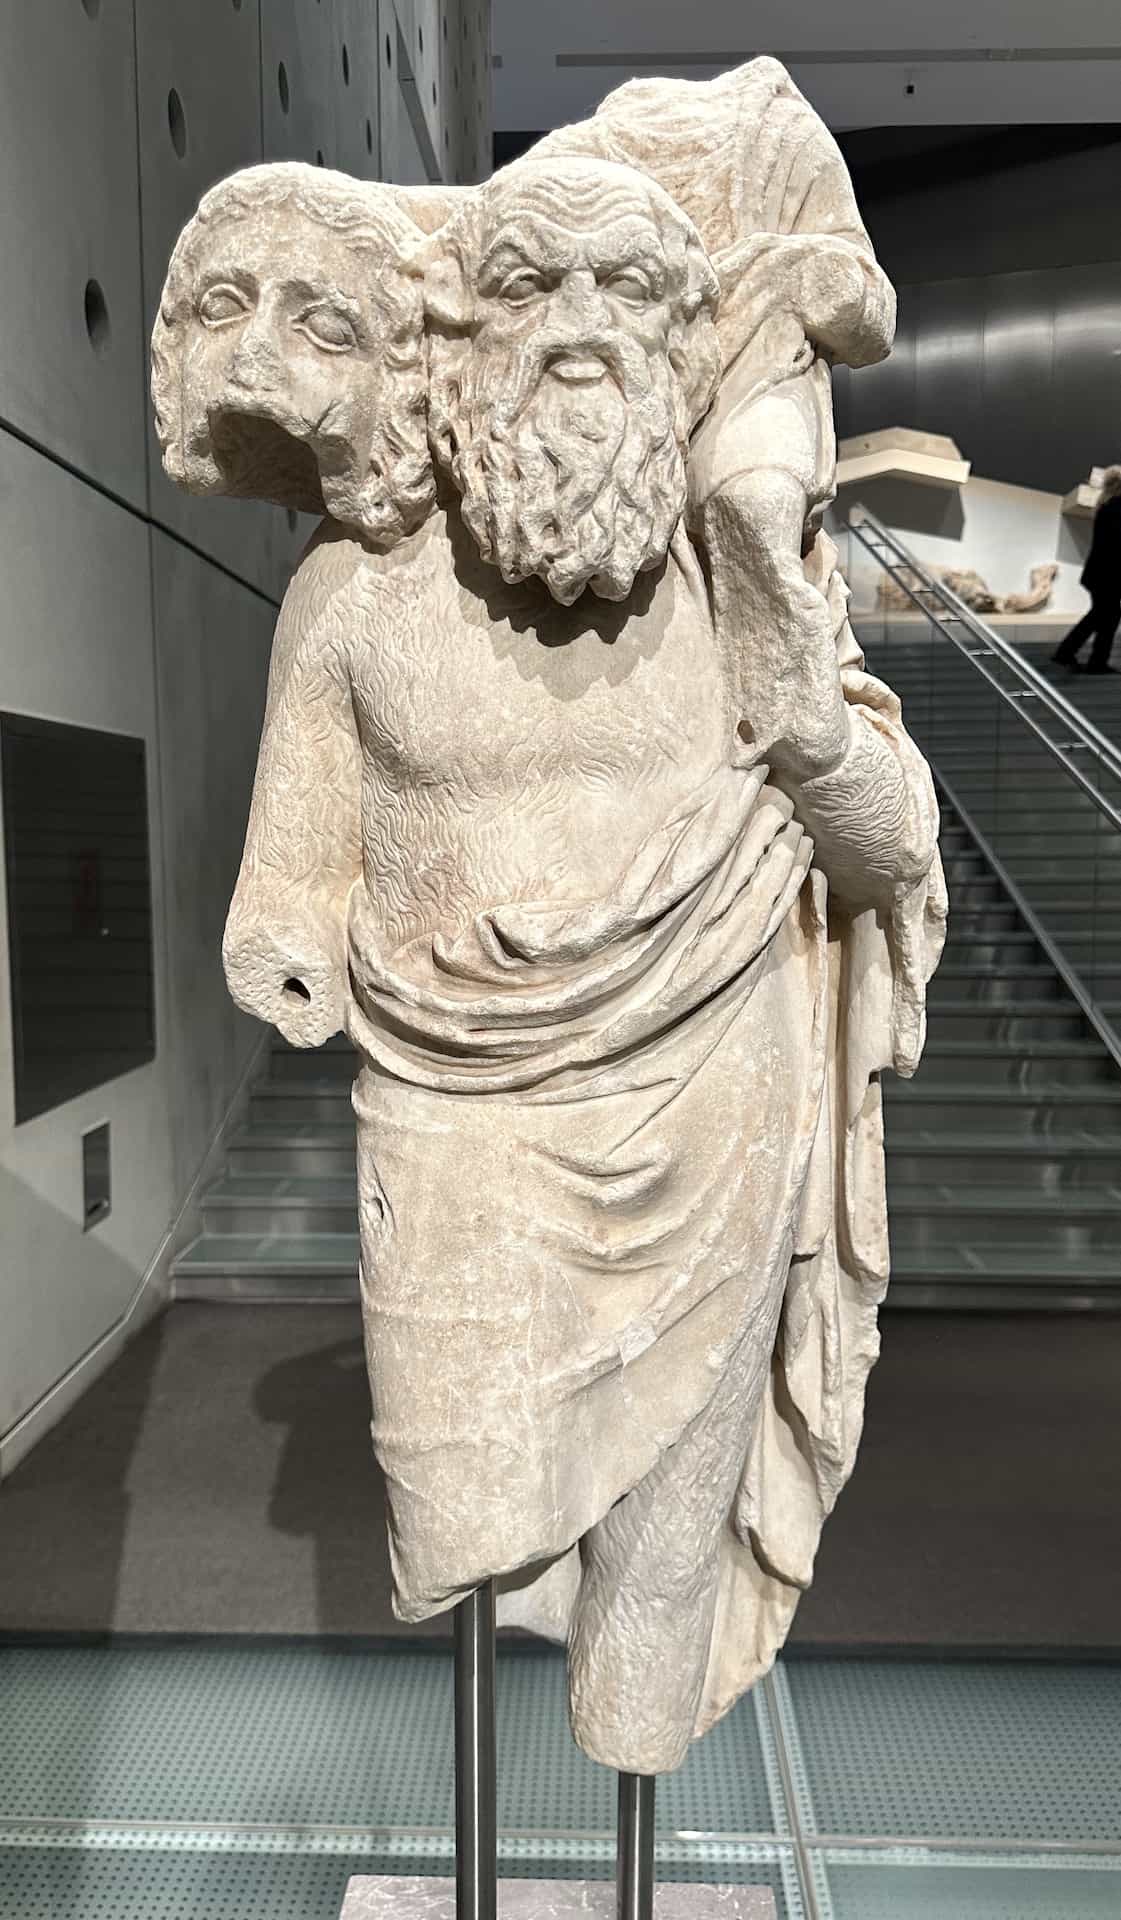 Papposilenus carrying the infant Dionysus; 2nd century BC at the Acropolis Museum in Athens, Greece